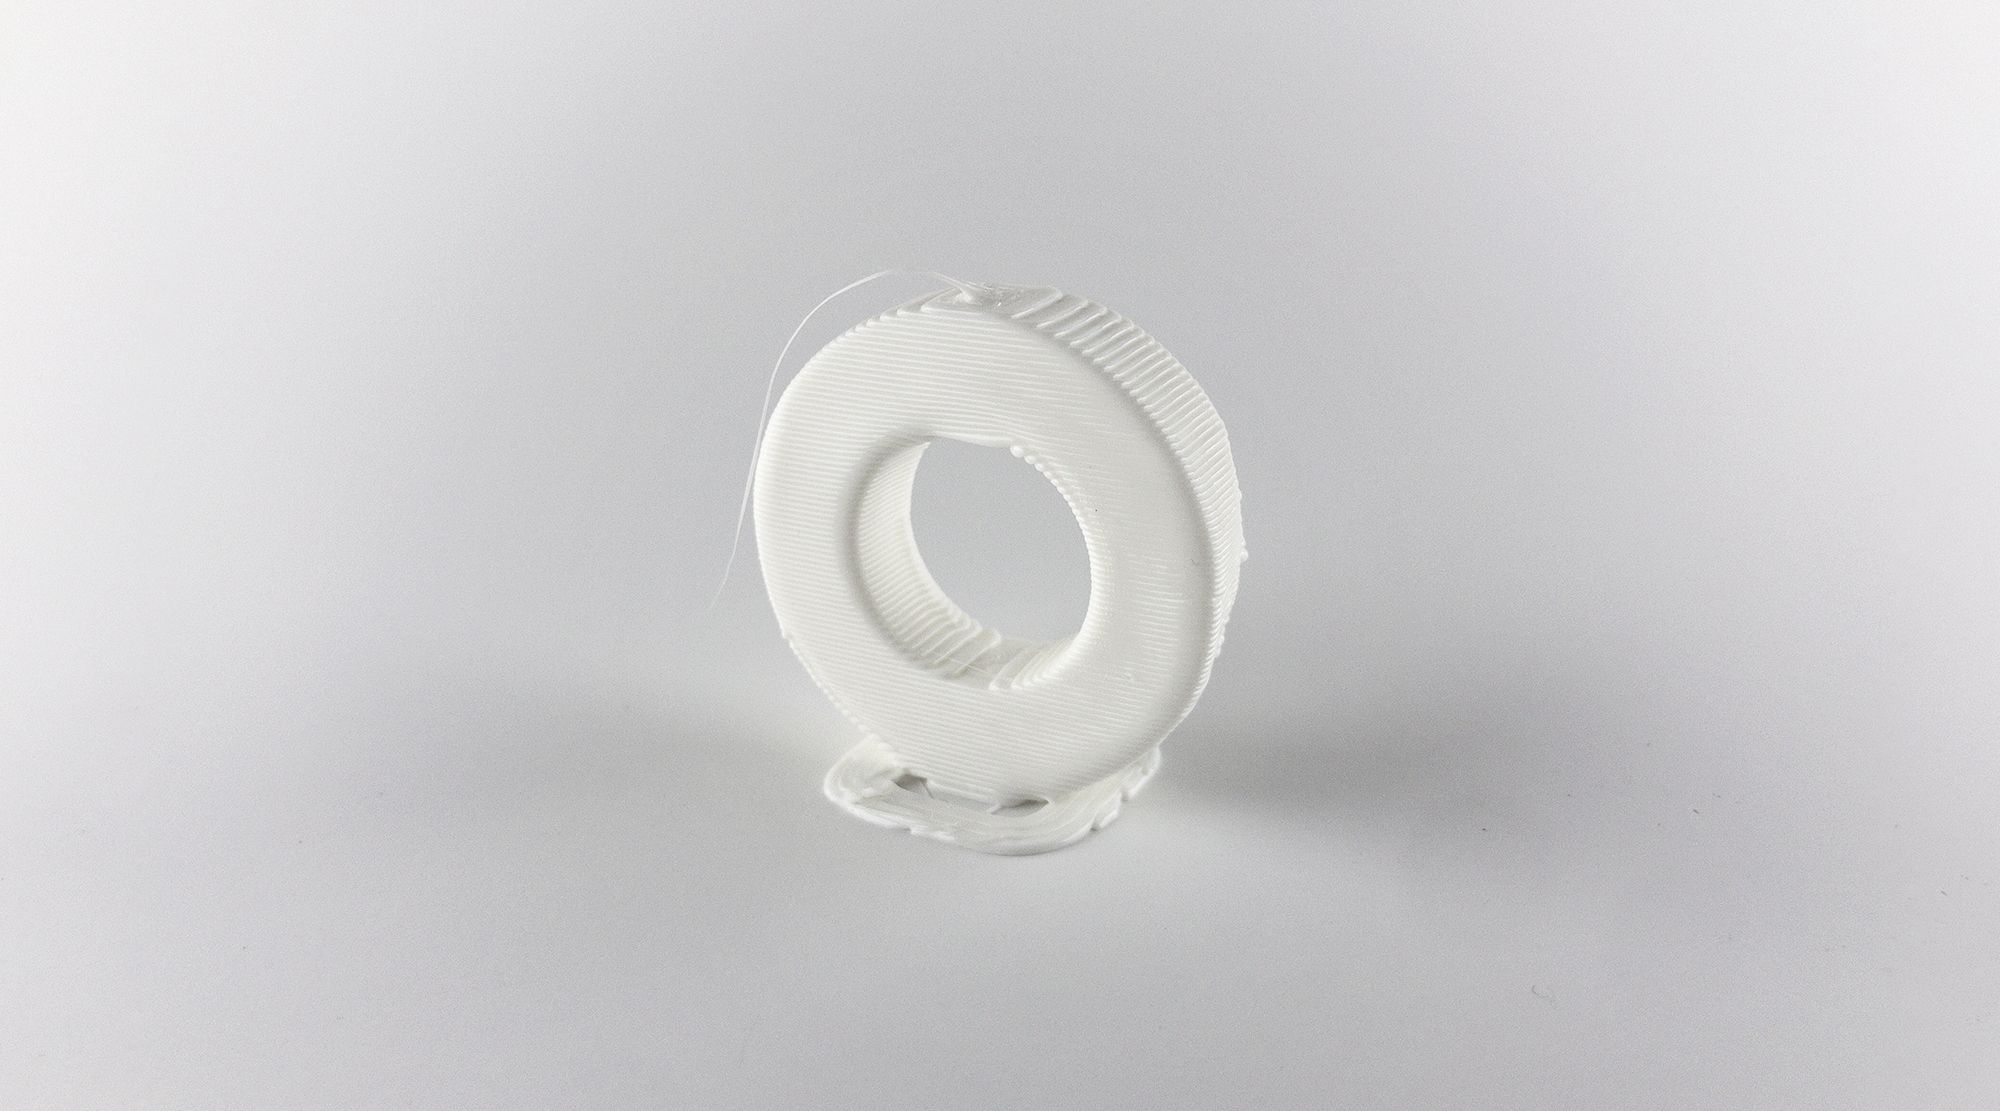 3D printed 'O' demonstrating the flat line at the top of the hole